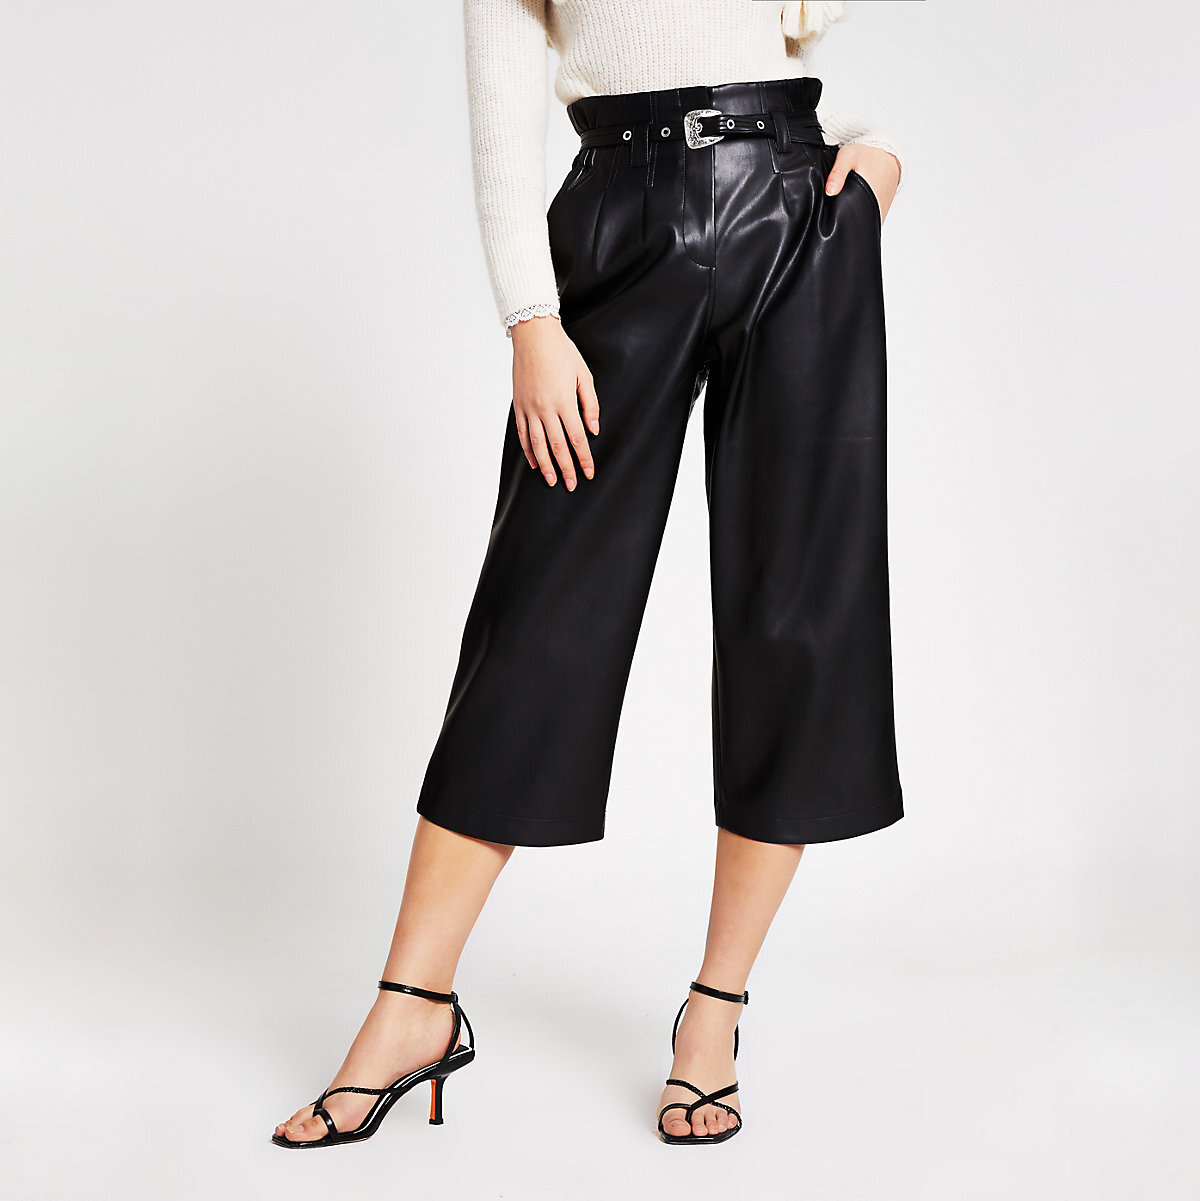 River Island_black-faux-leather-belted-culotte-trousers_795211_main.jpg